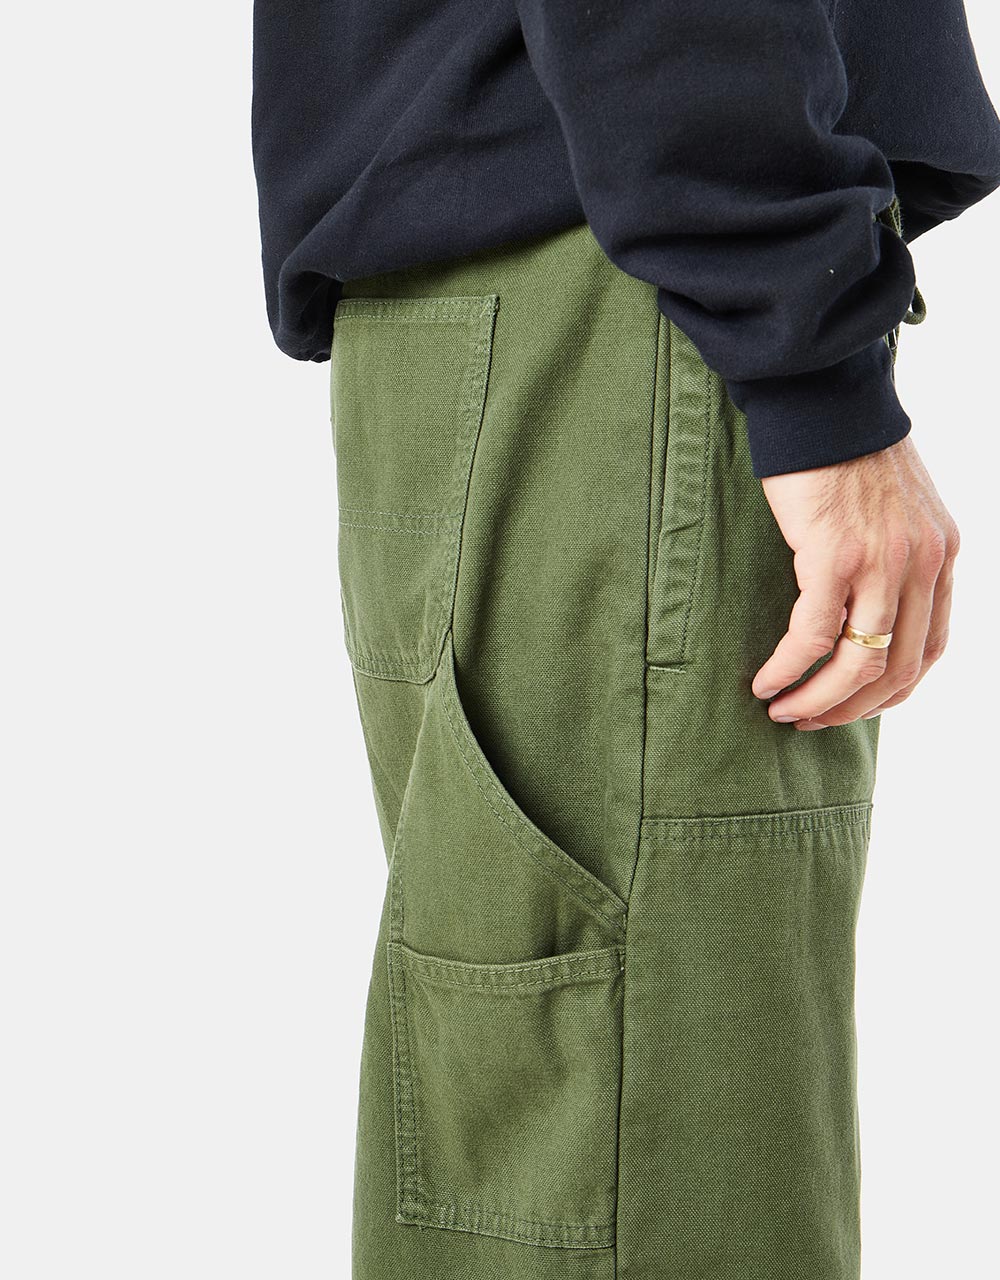 Route One Double Knee Heavyweight Canvas Pants - Olive